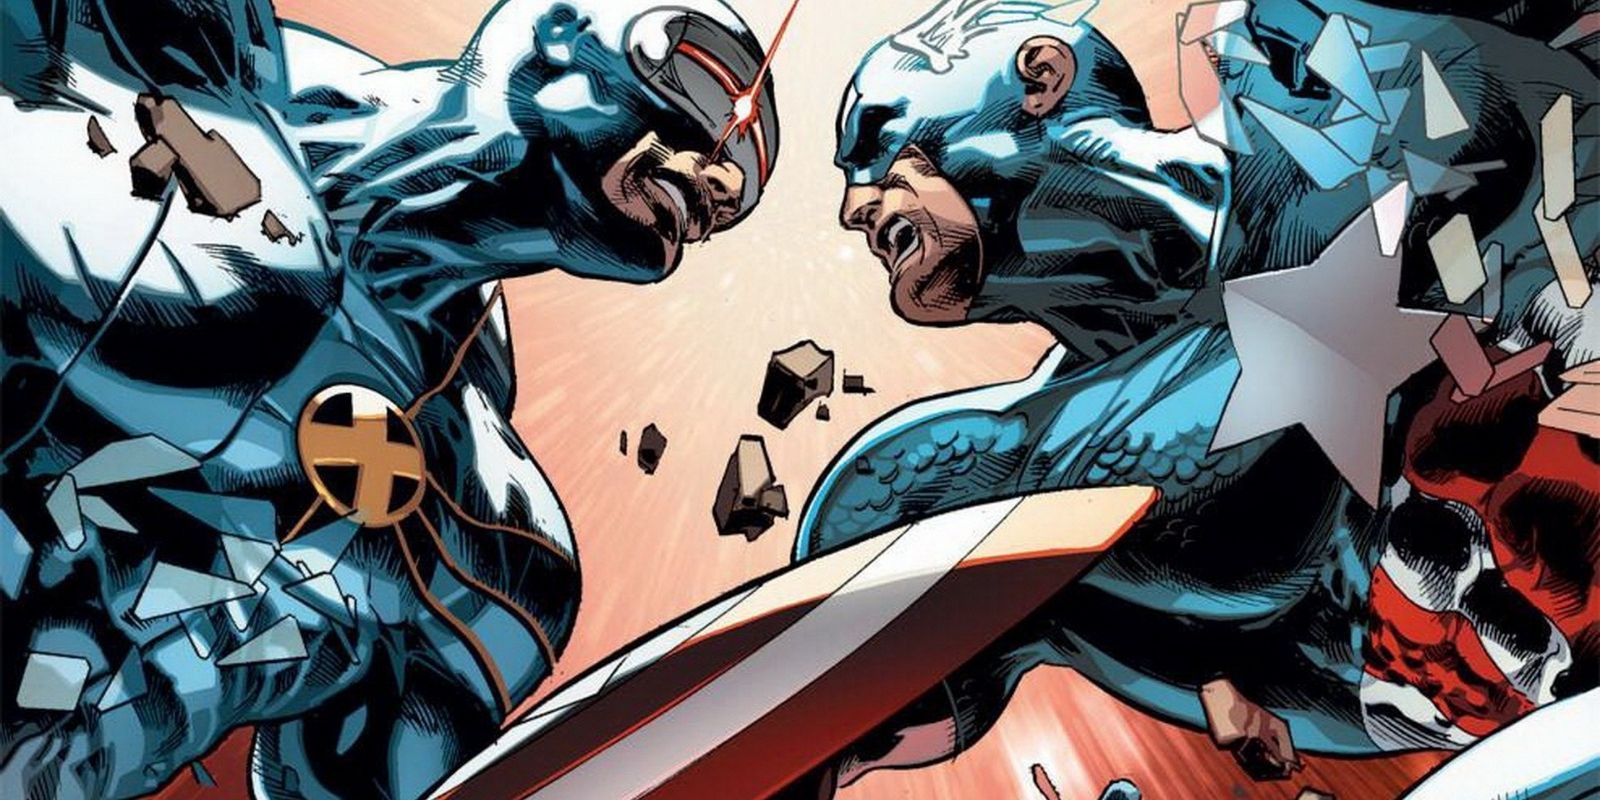 Cyclops from the X-Men clashing with Captain America from The Avengers